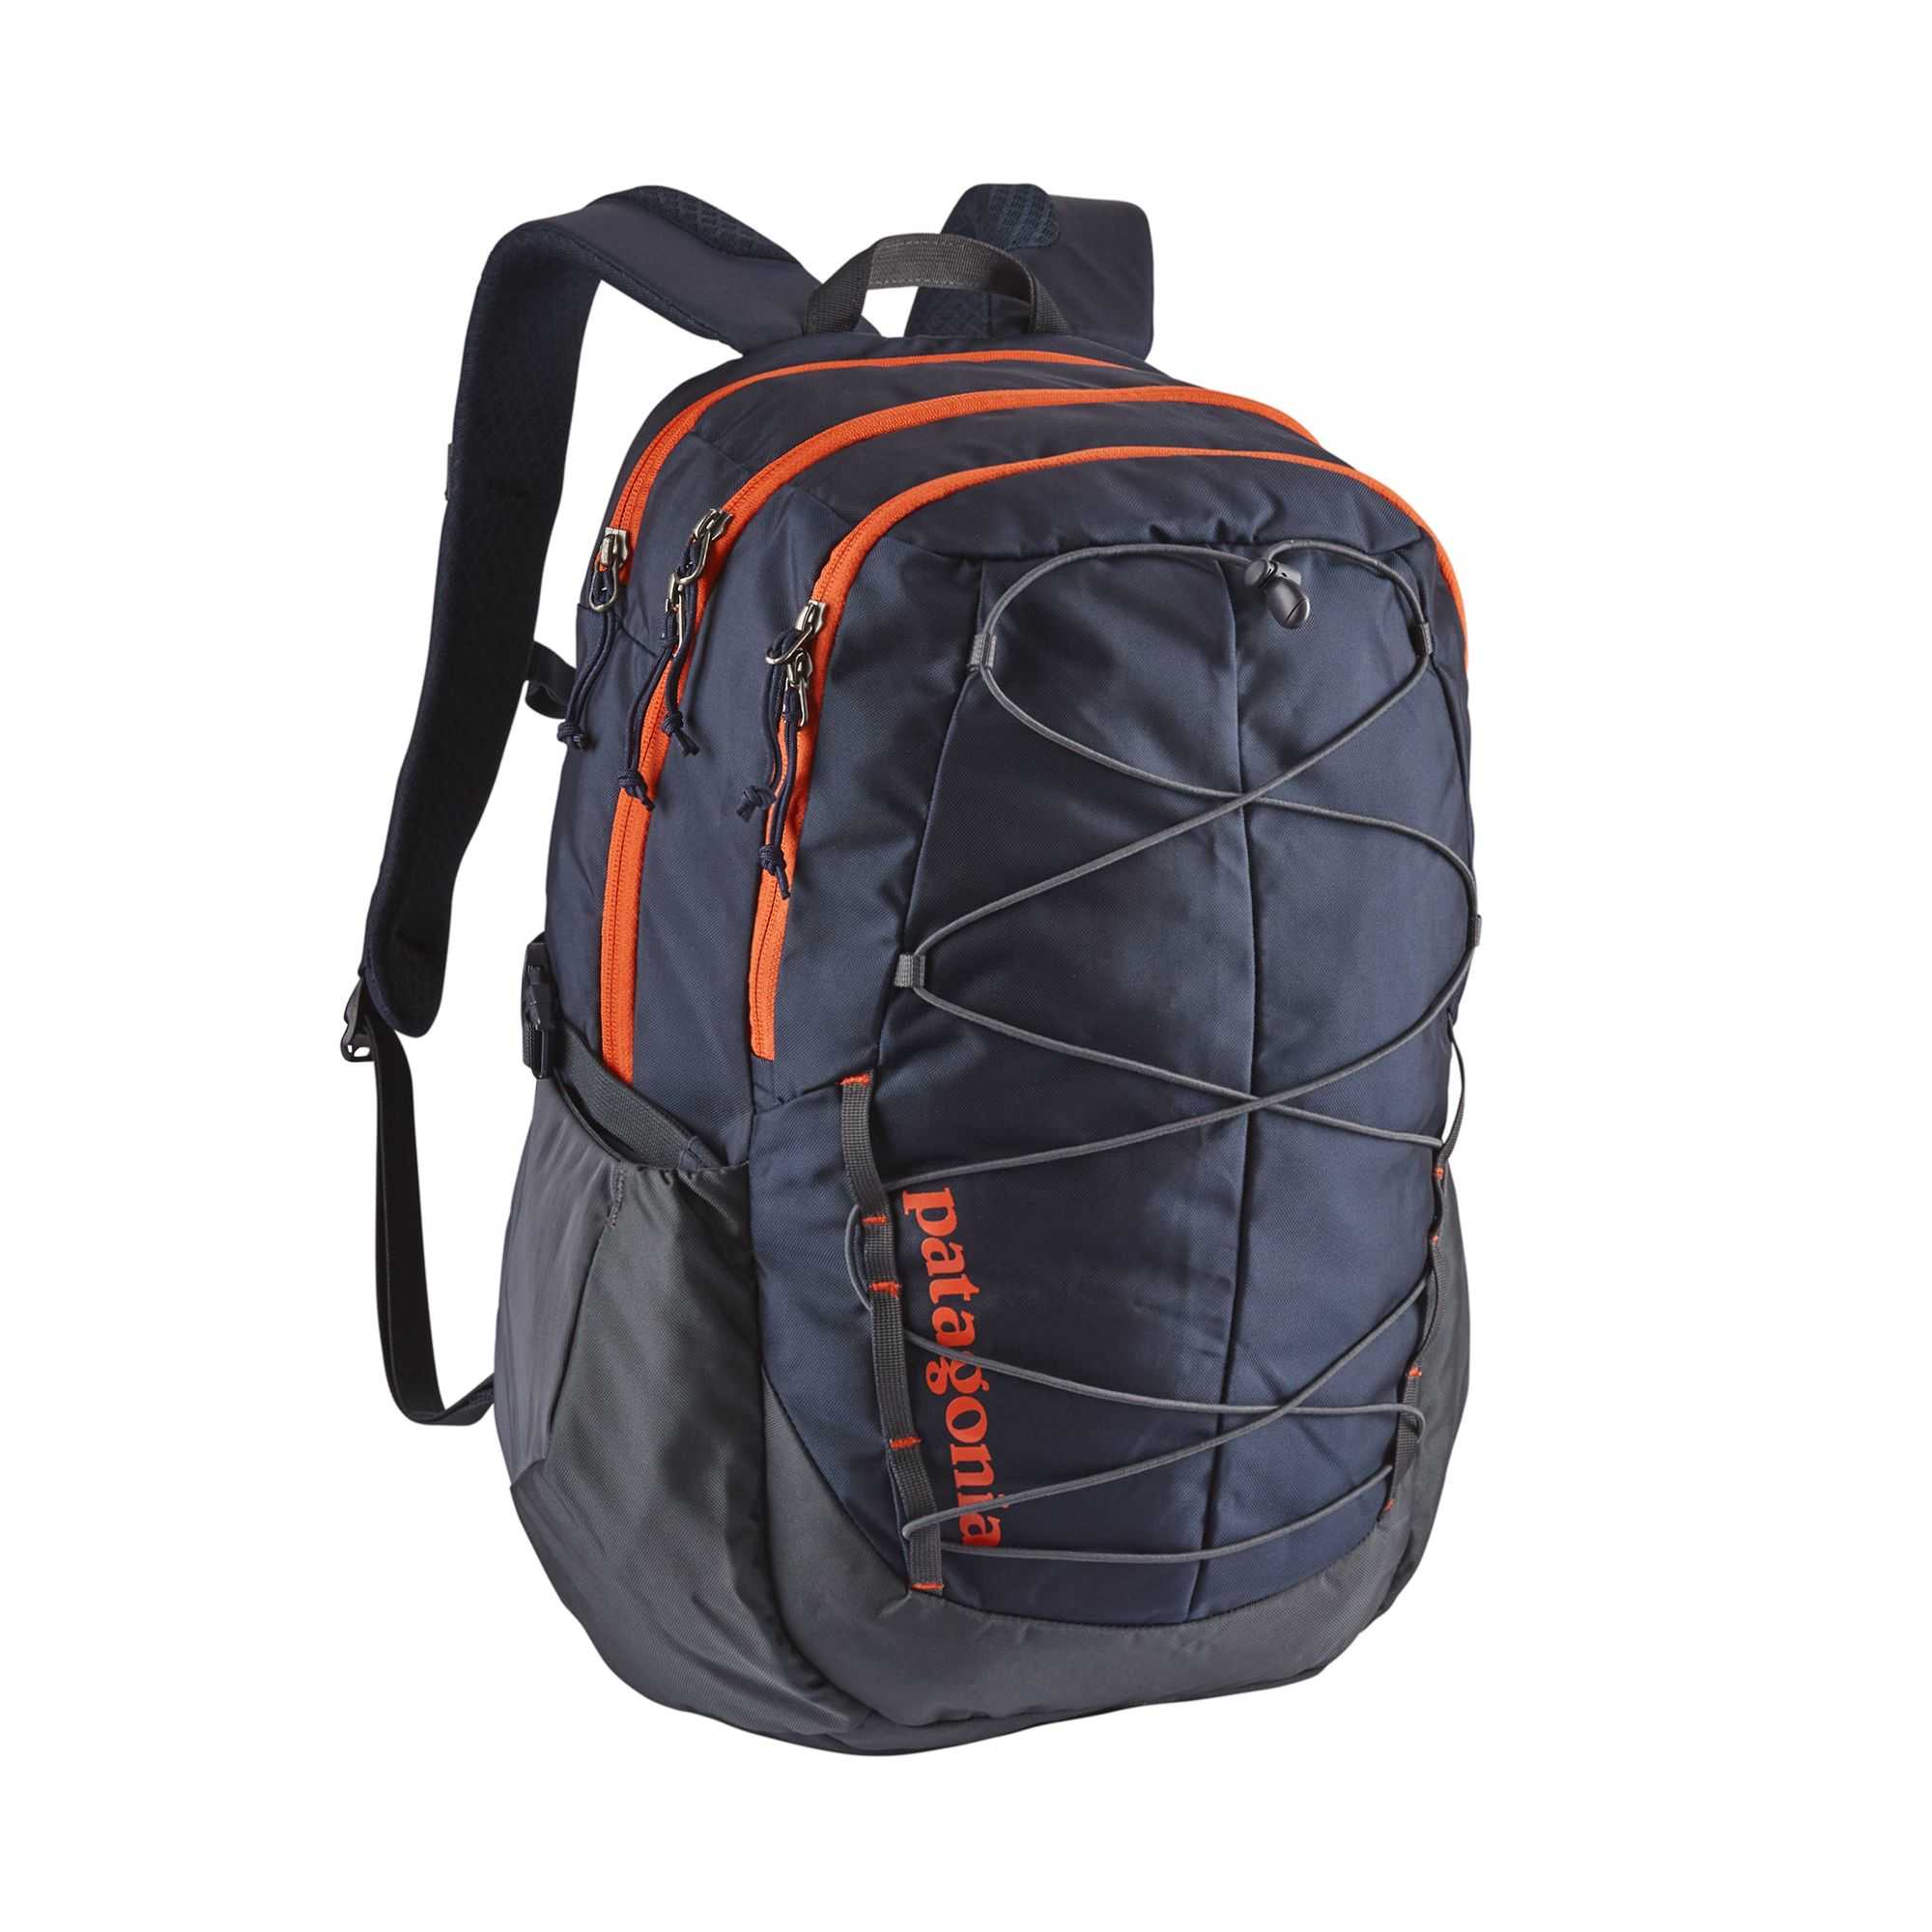 Sac à dos Chacabuco Backpack 30L